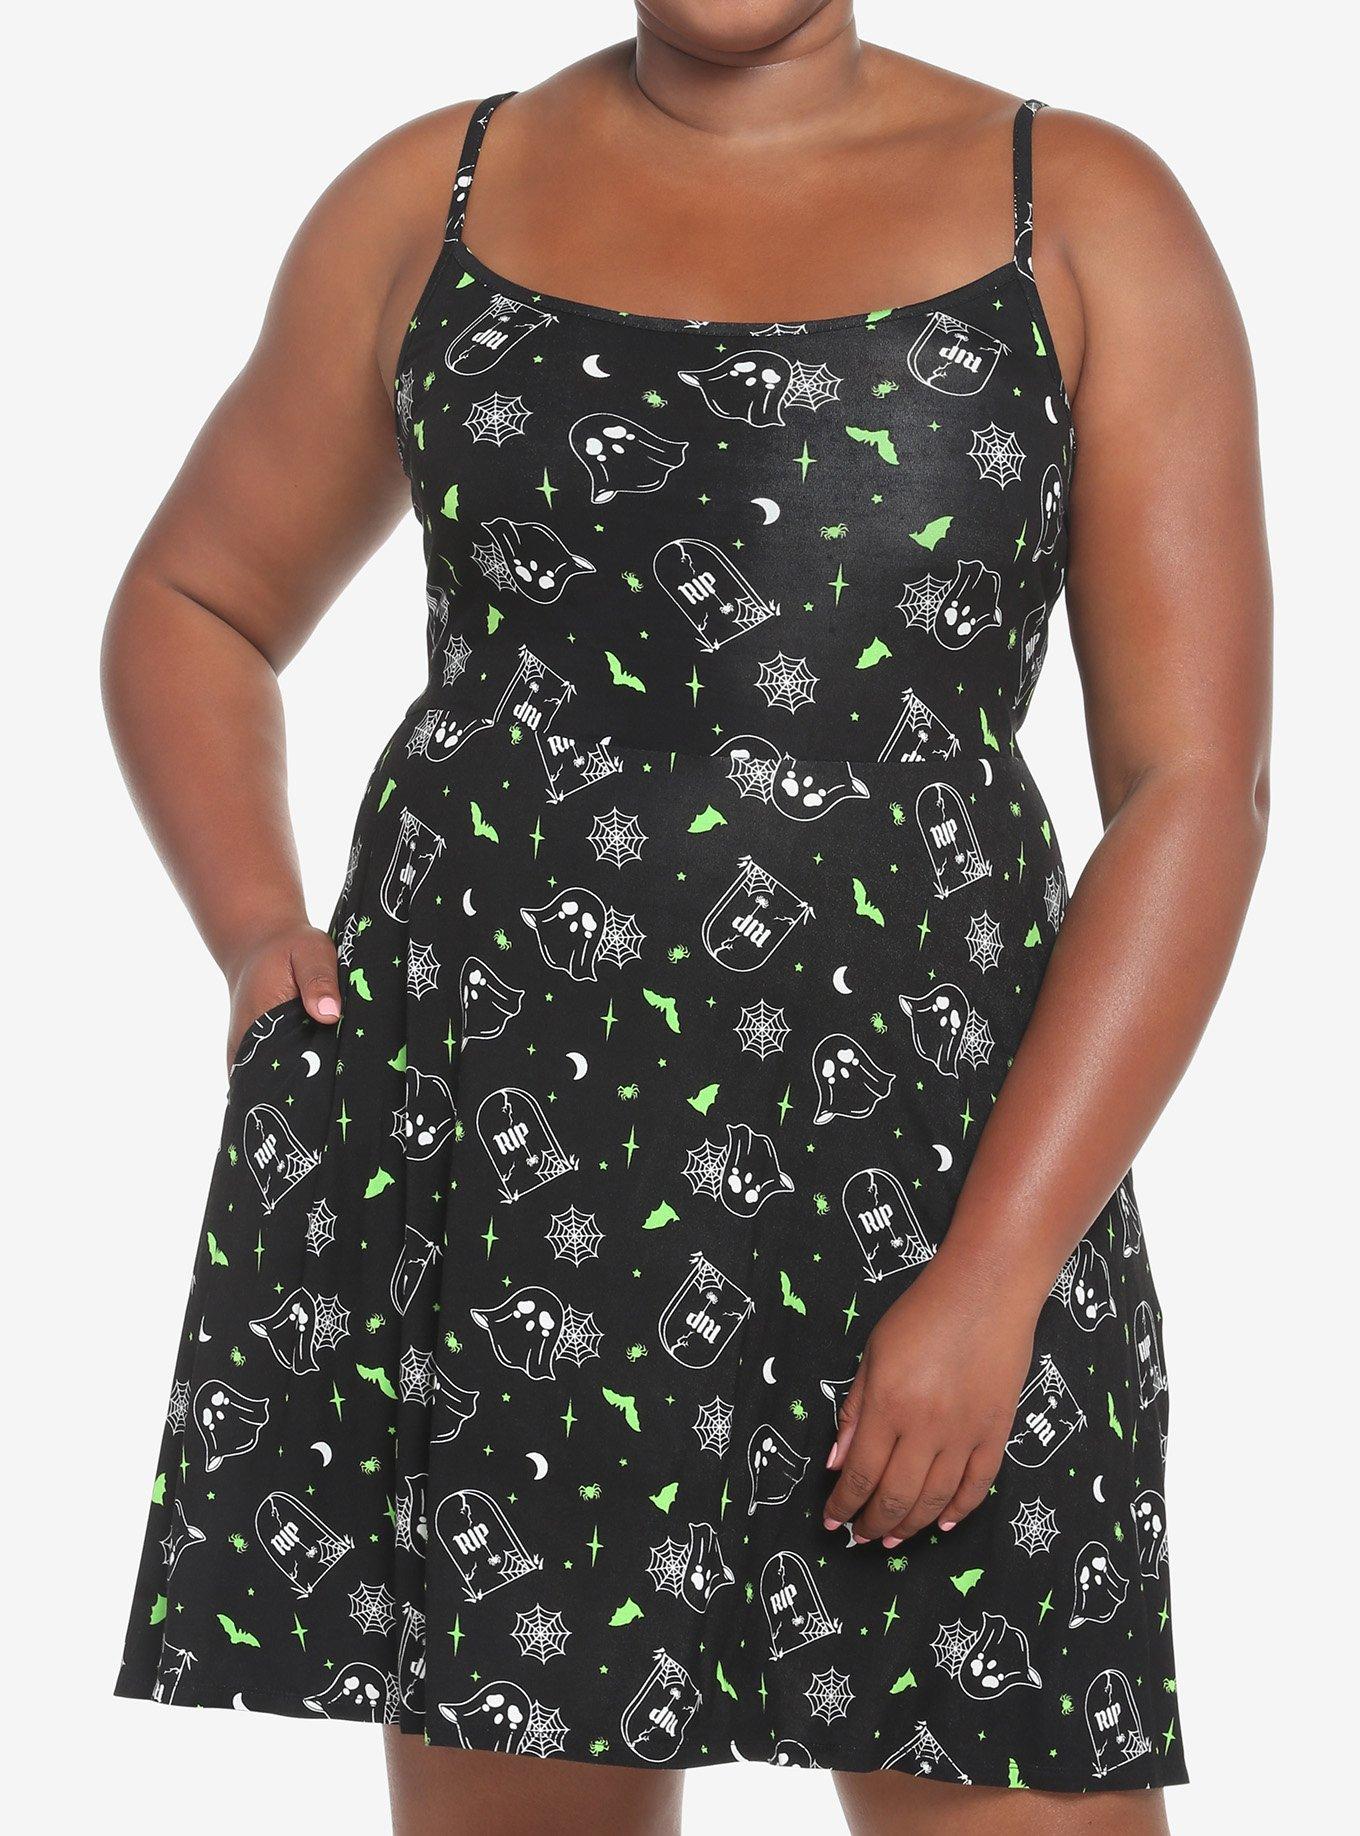 Tombstone Ghost Dress Plus Size, BLACK, hi-res